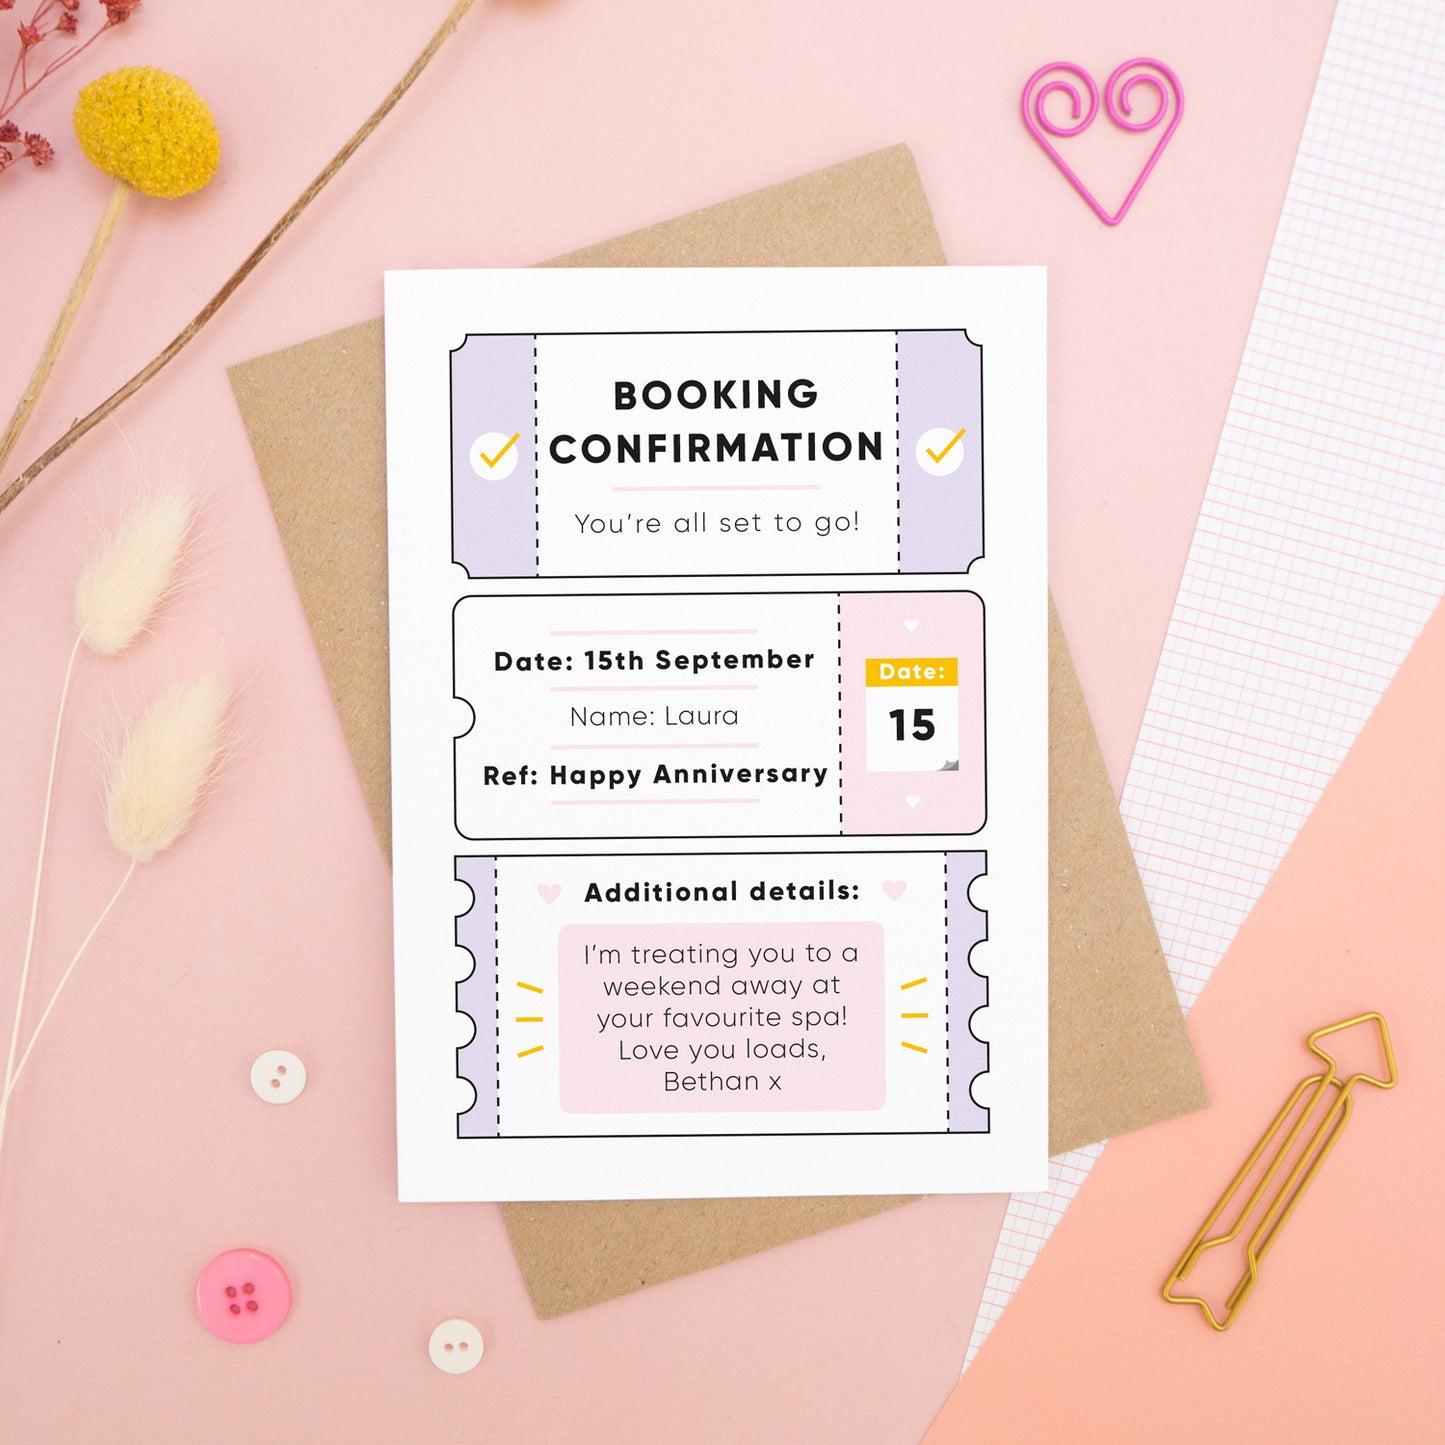 A personalised anniversary booking confirmation gift card lying flat lay on a pink and peach background scattered with dry flowers, grid paper, buttons and a heart. The card is lying on it’s kraft brown envelope and pictured is the lilac version of the gift card.